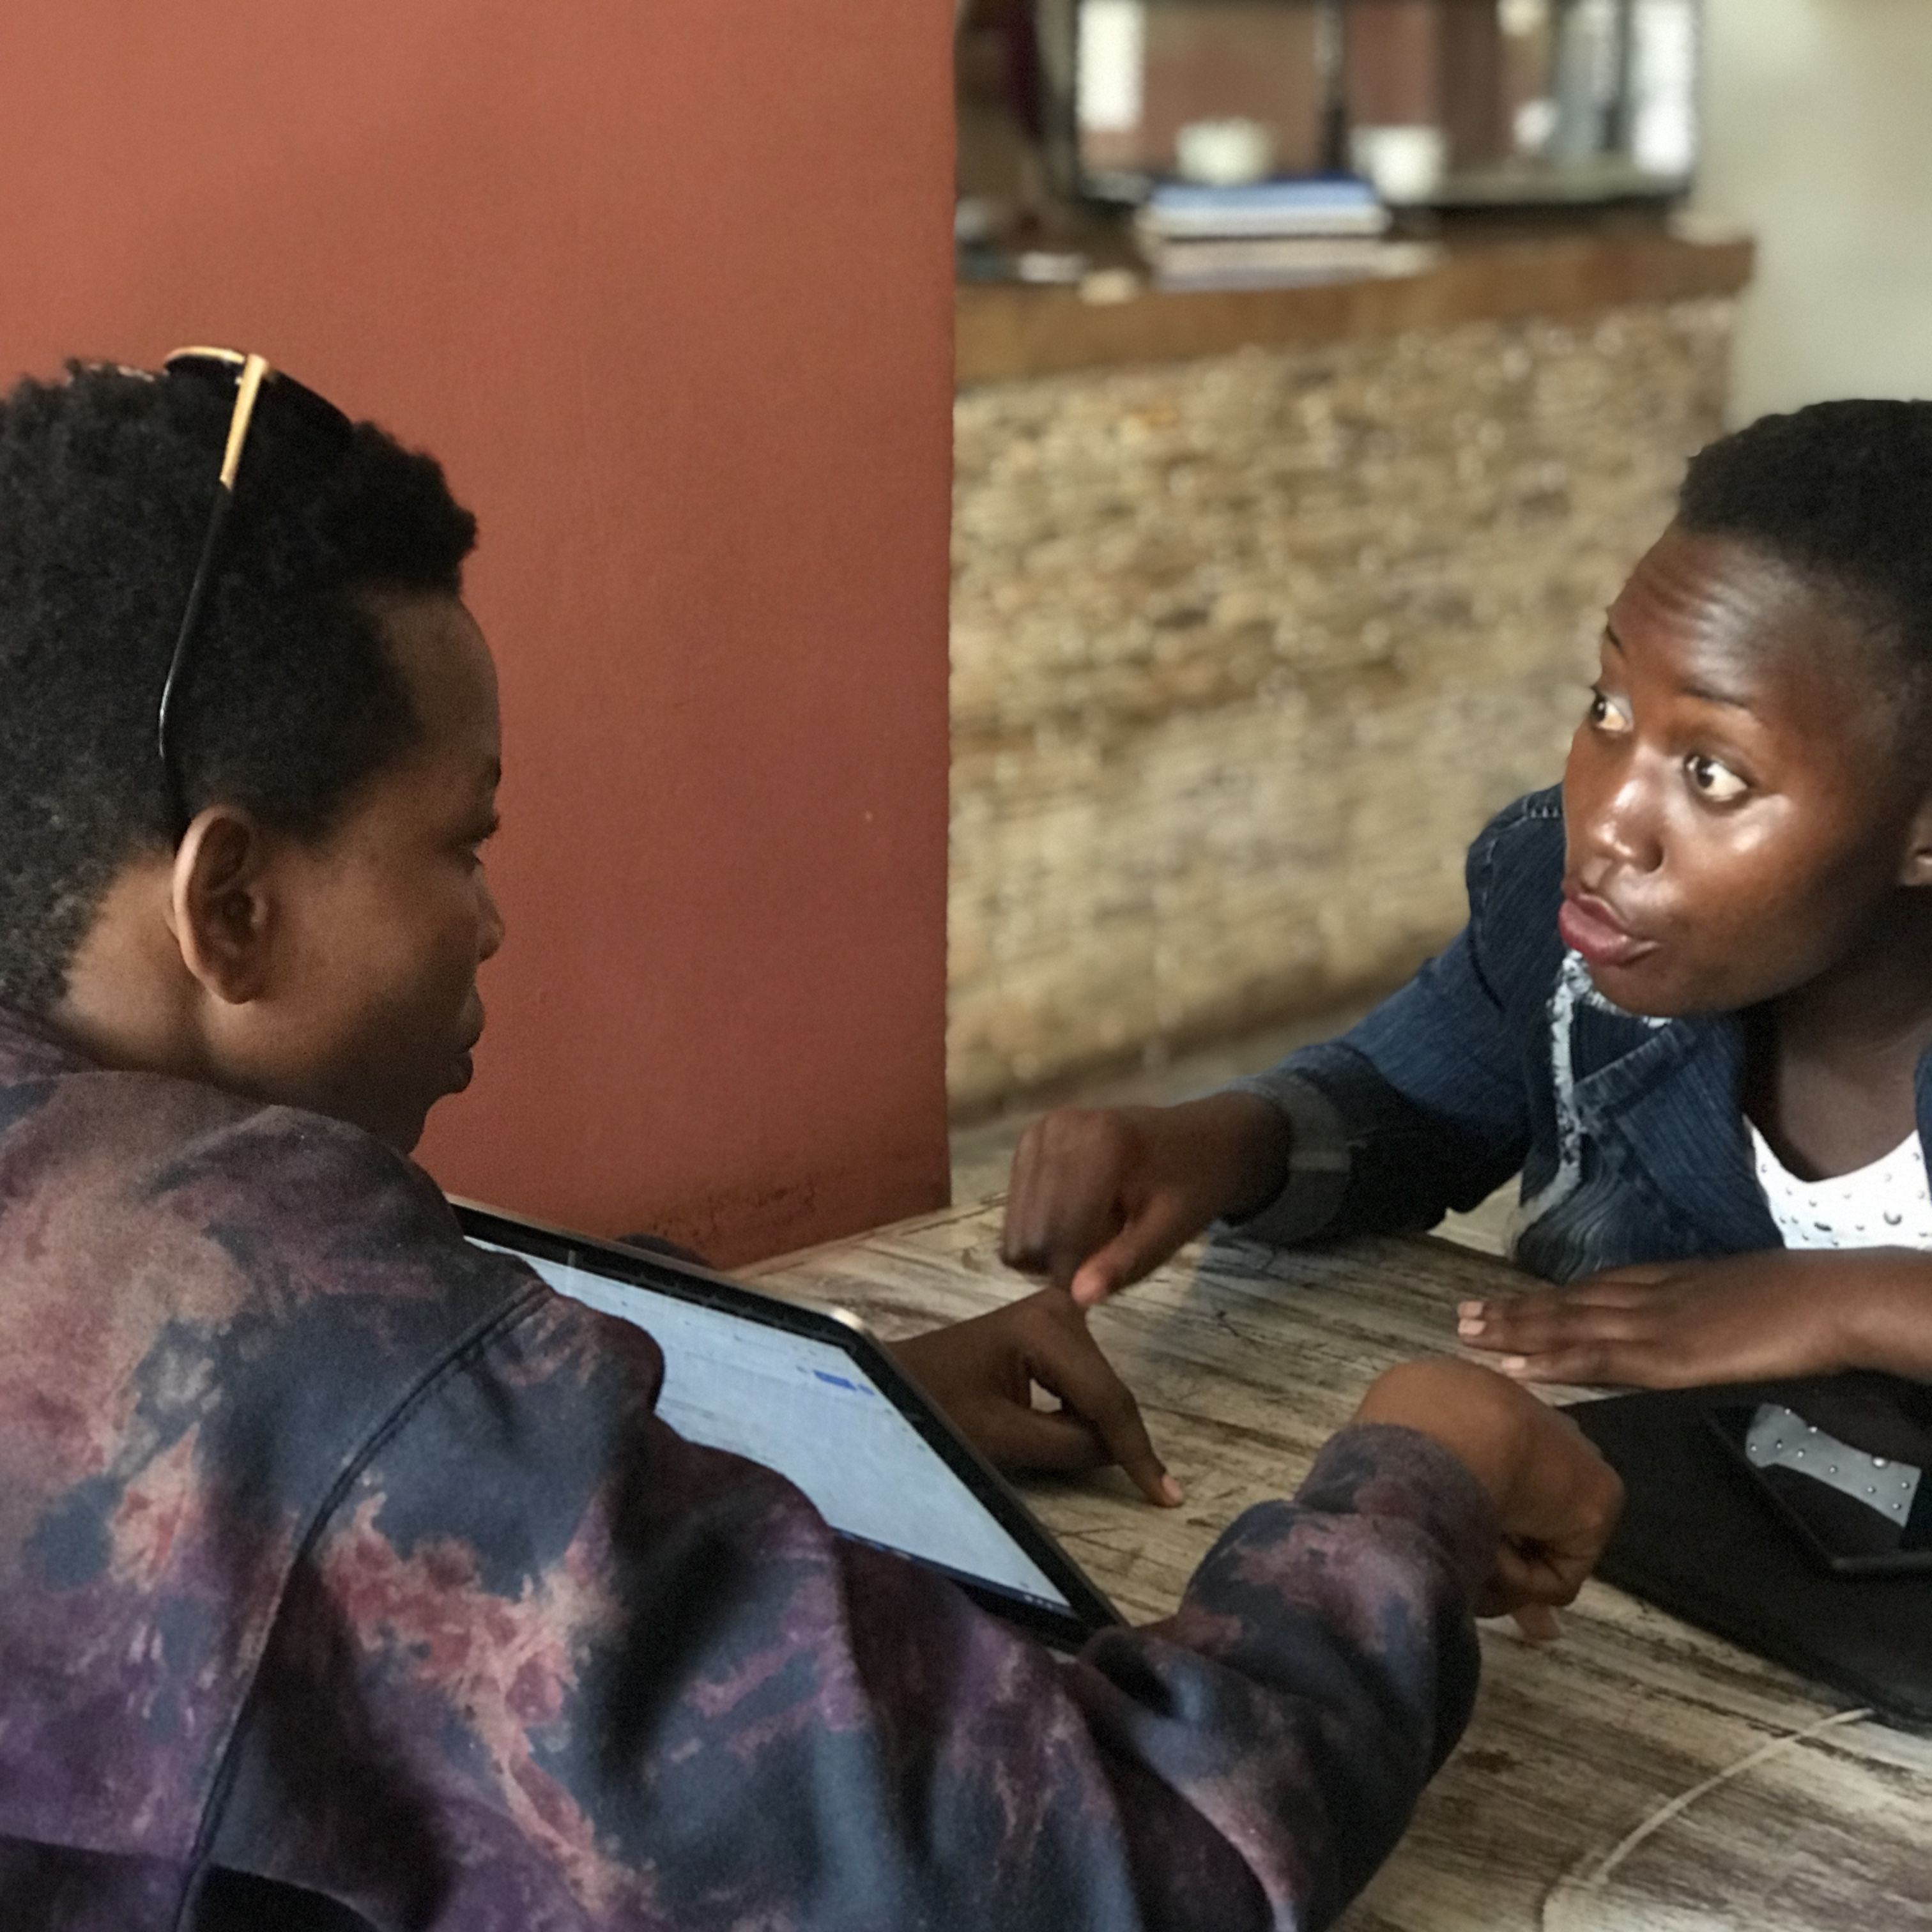 Betty Benjamin (left) and Nakaziba Sumaya, two members of the GIRLY network team, receive word of a case of sexual violence in Iganga and discuss how to best support the victim. Image by Keishi Foecke. Uganda, 2019.